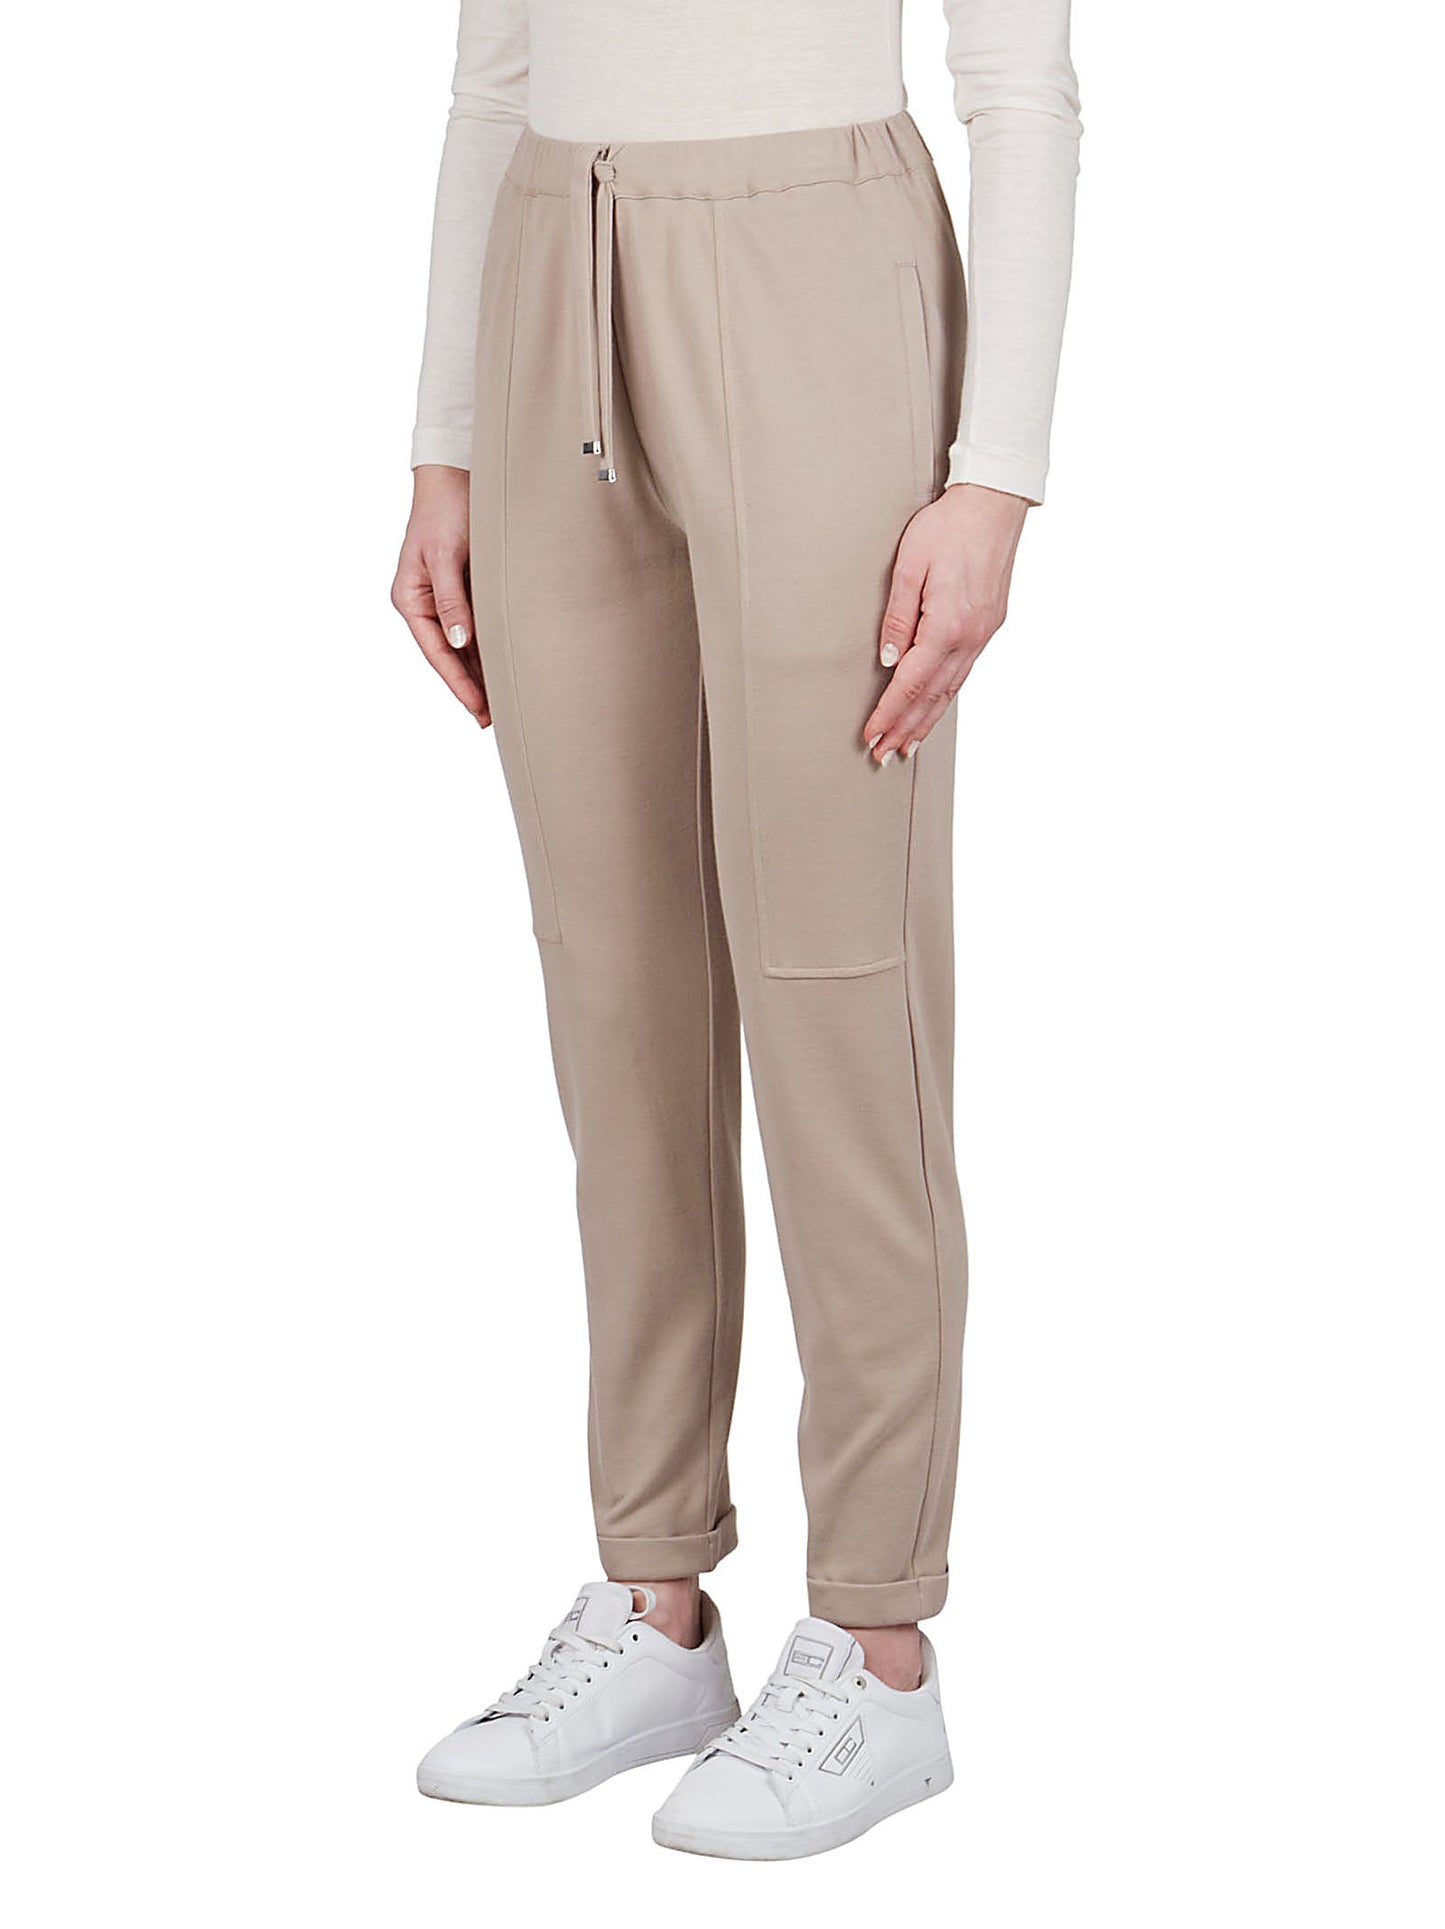 The Beige Cotton Drawstring Comfy Trouser by Purotatto